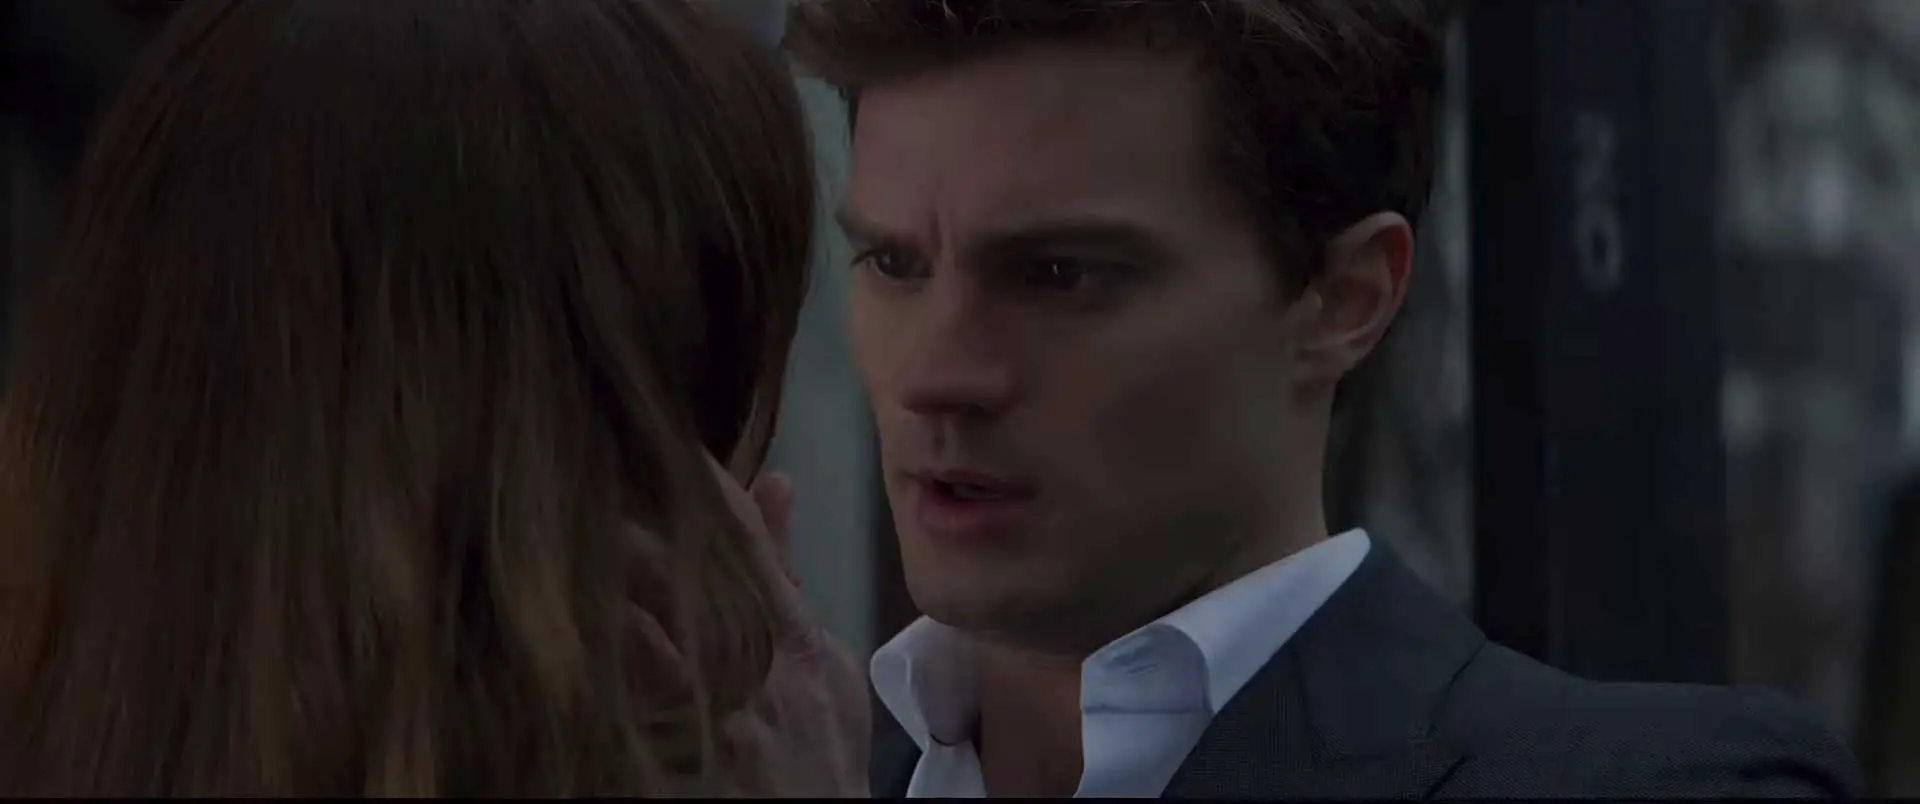 50 shades of grey film download